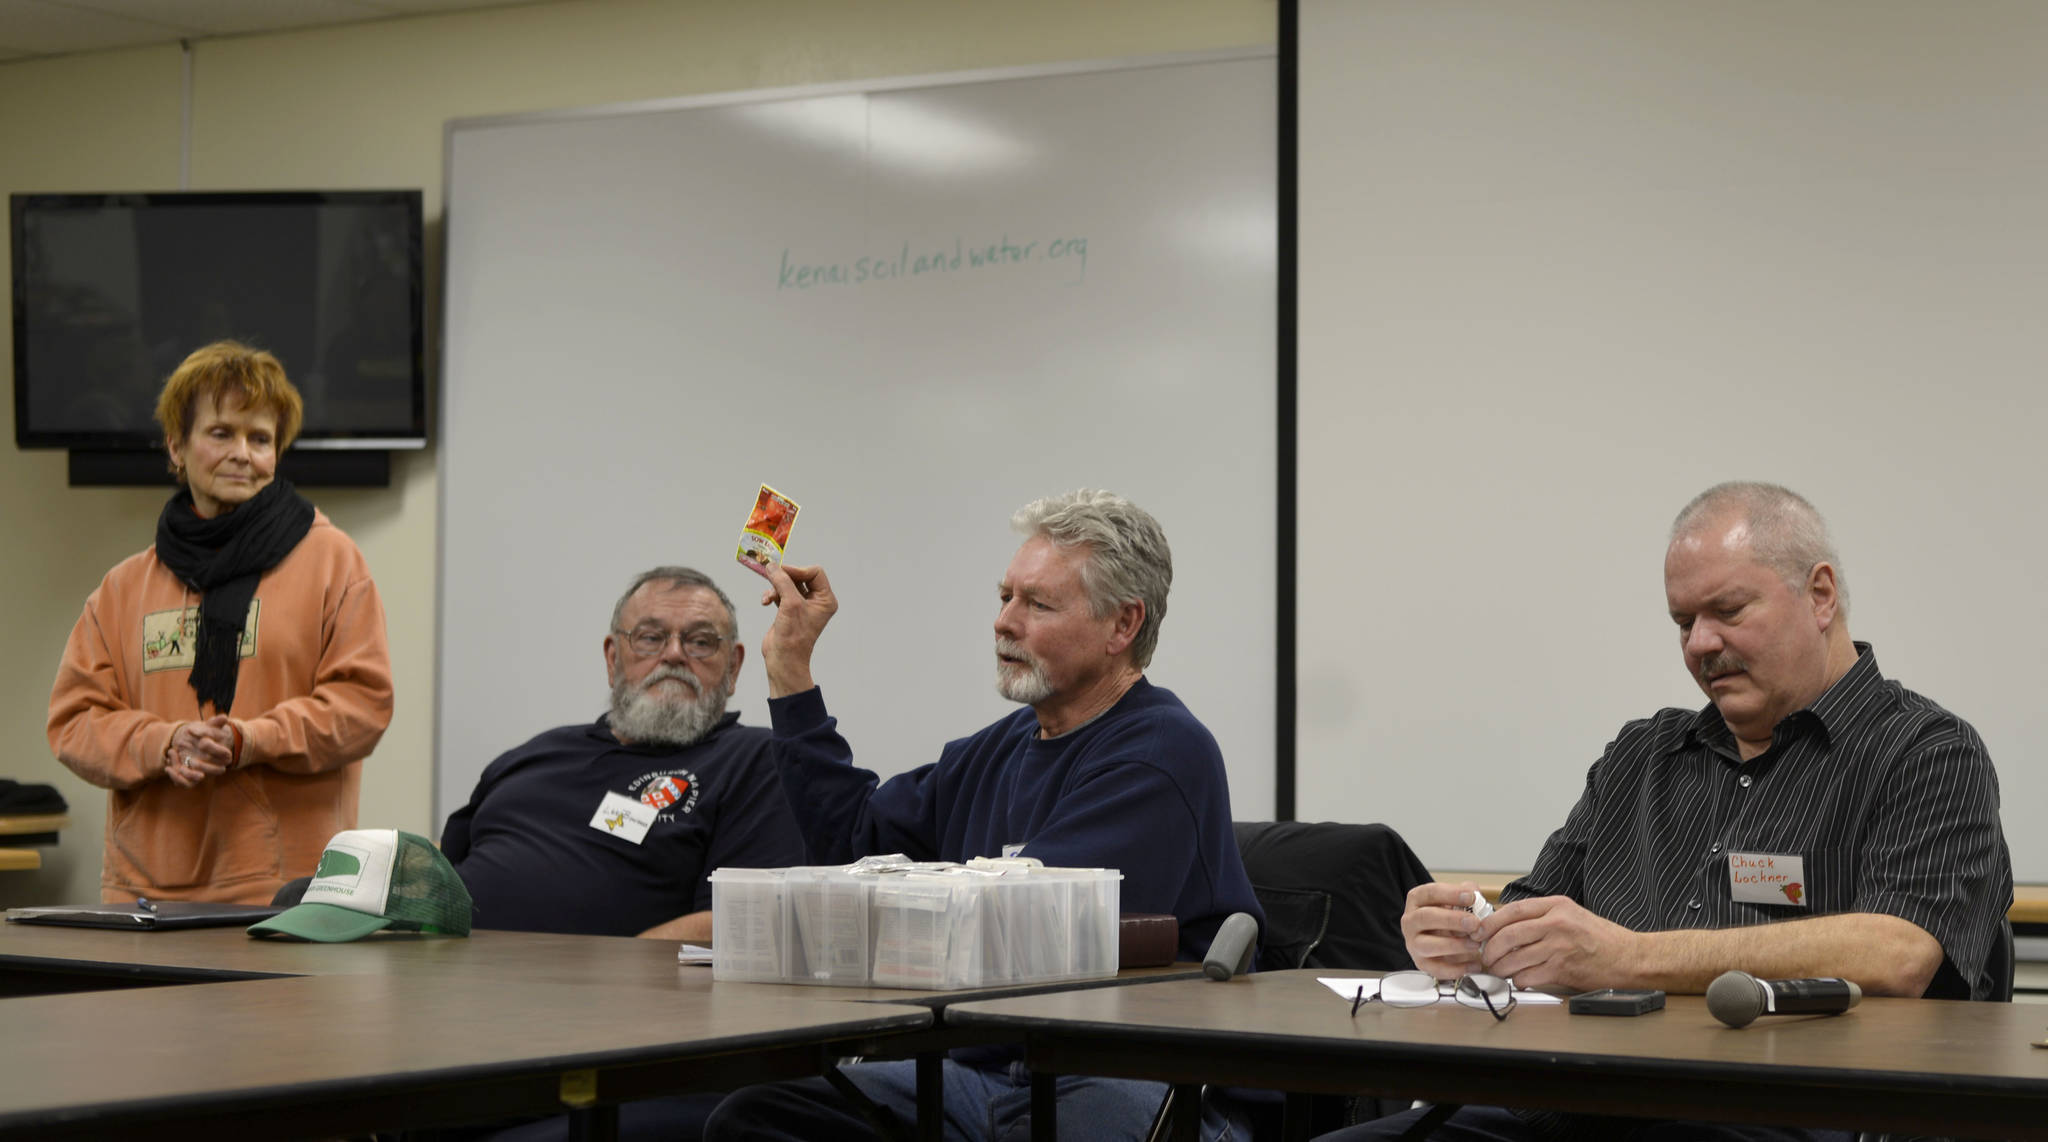 Moderator Marion Nelson, left, led a discussion among panelists Lee Bowman, Don Adams, Chuck Lockner and Dennis Spindler about seeds, soils and sprouts in preparation for the Spring 2017 growing season on Tuesday, March 14, 2017. The meeting was part of the Central Peninsula Garden Club’s monthly programming. (Kat Sorensen/Peninsula Clarion)